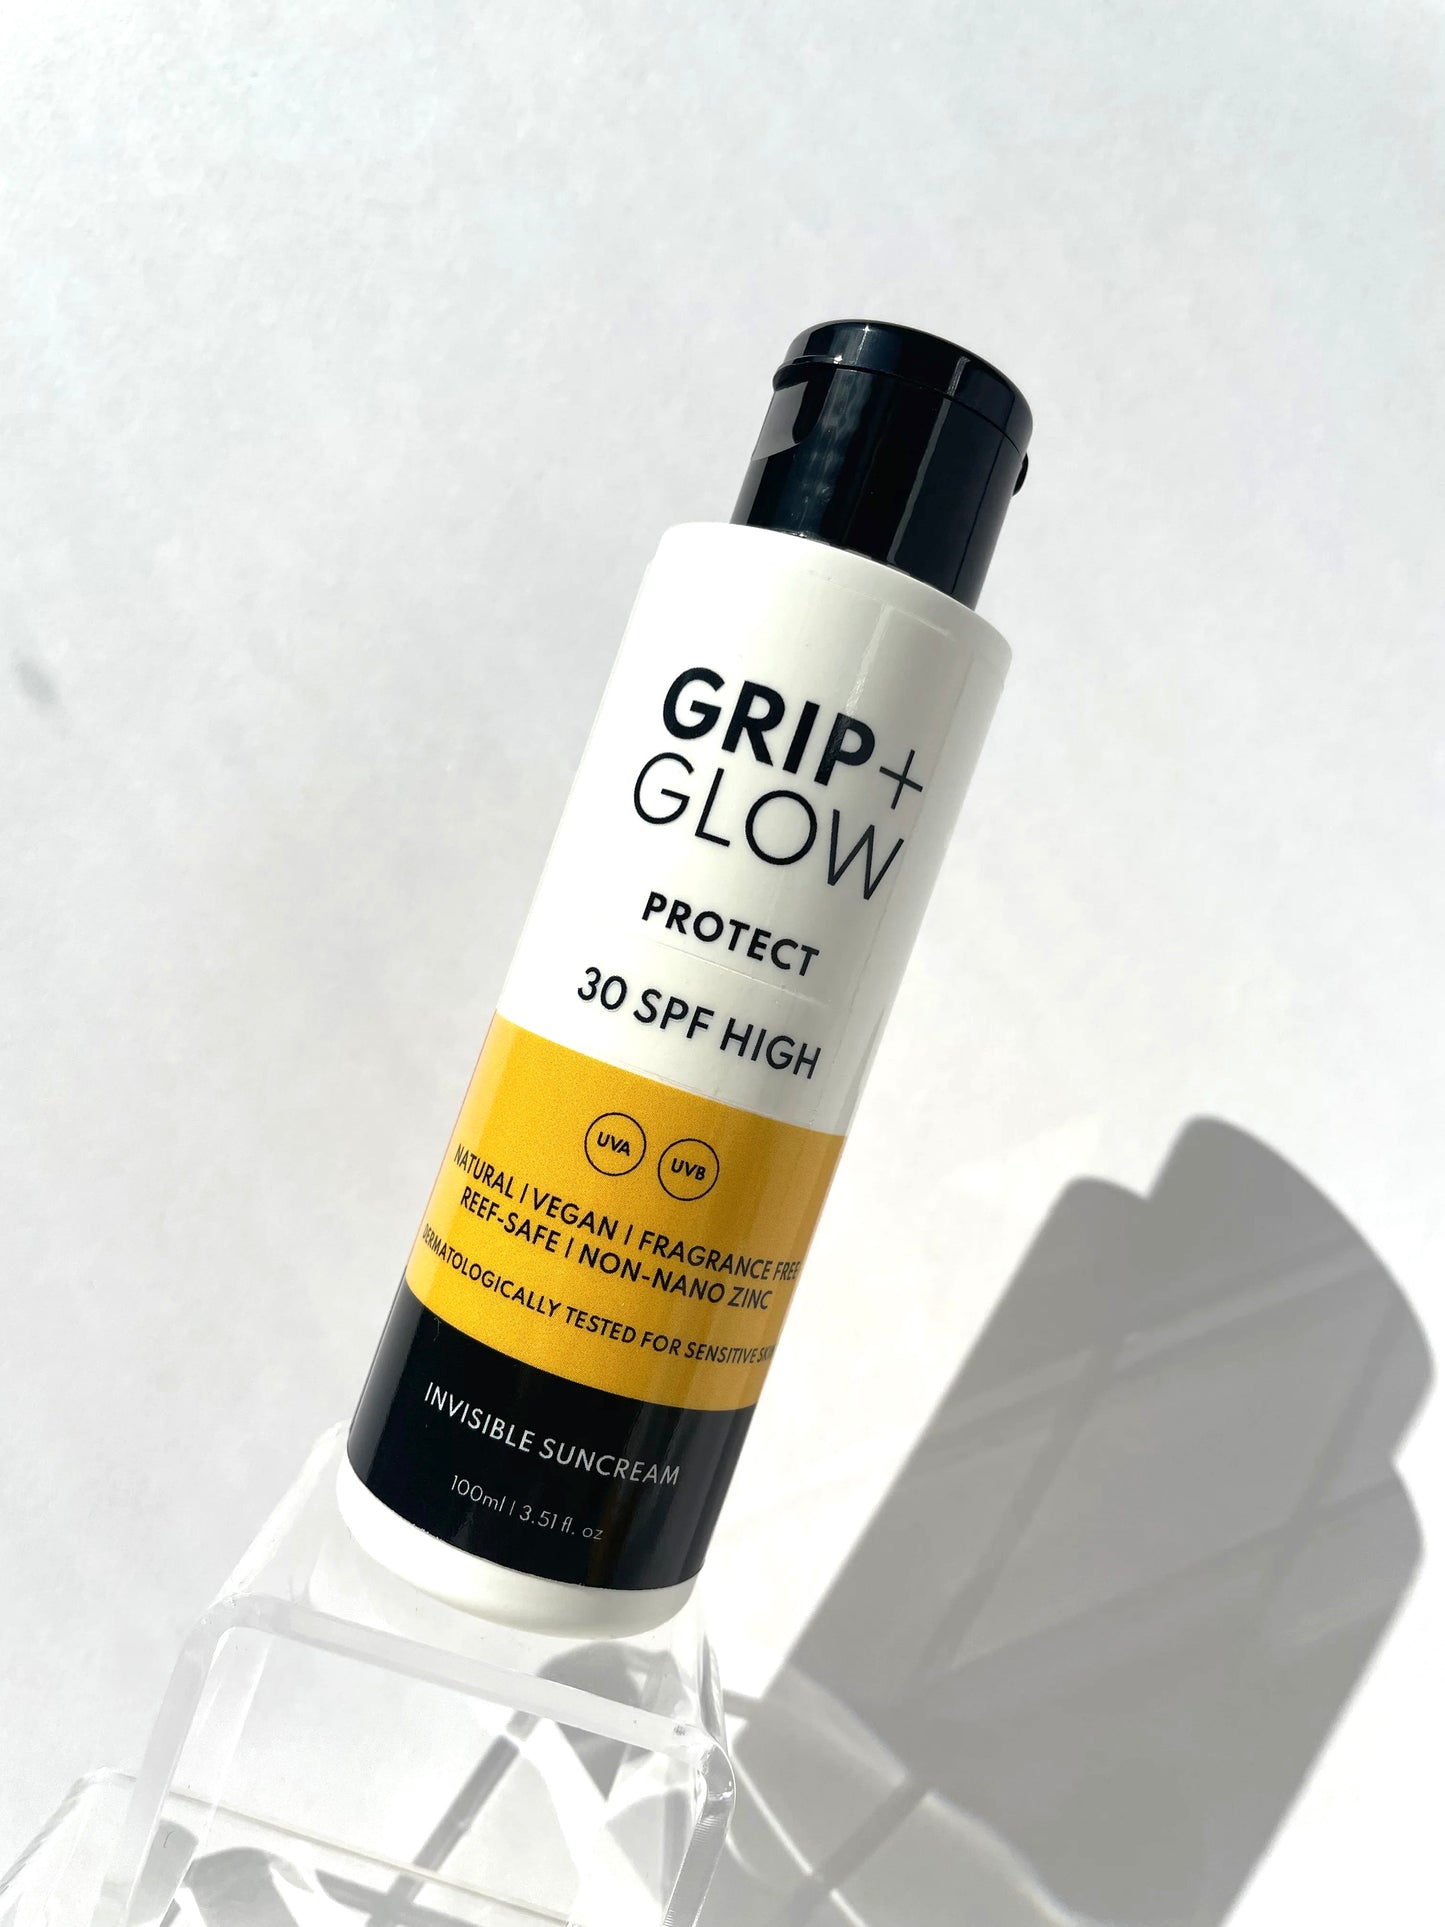 Grip + Glow Protect Invisible Suncream